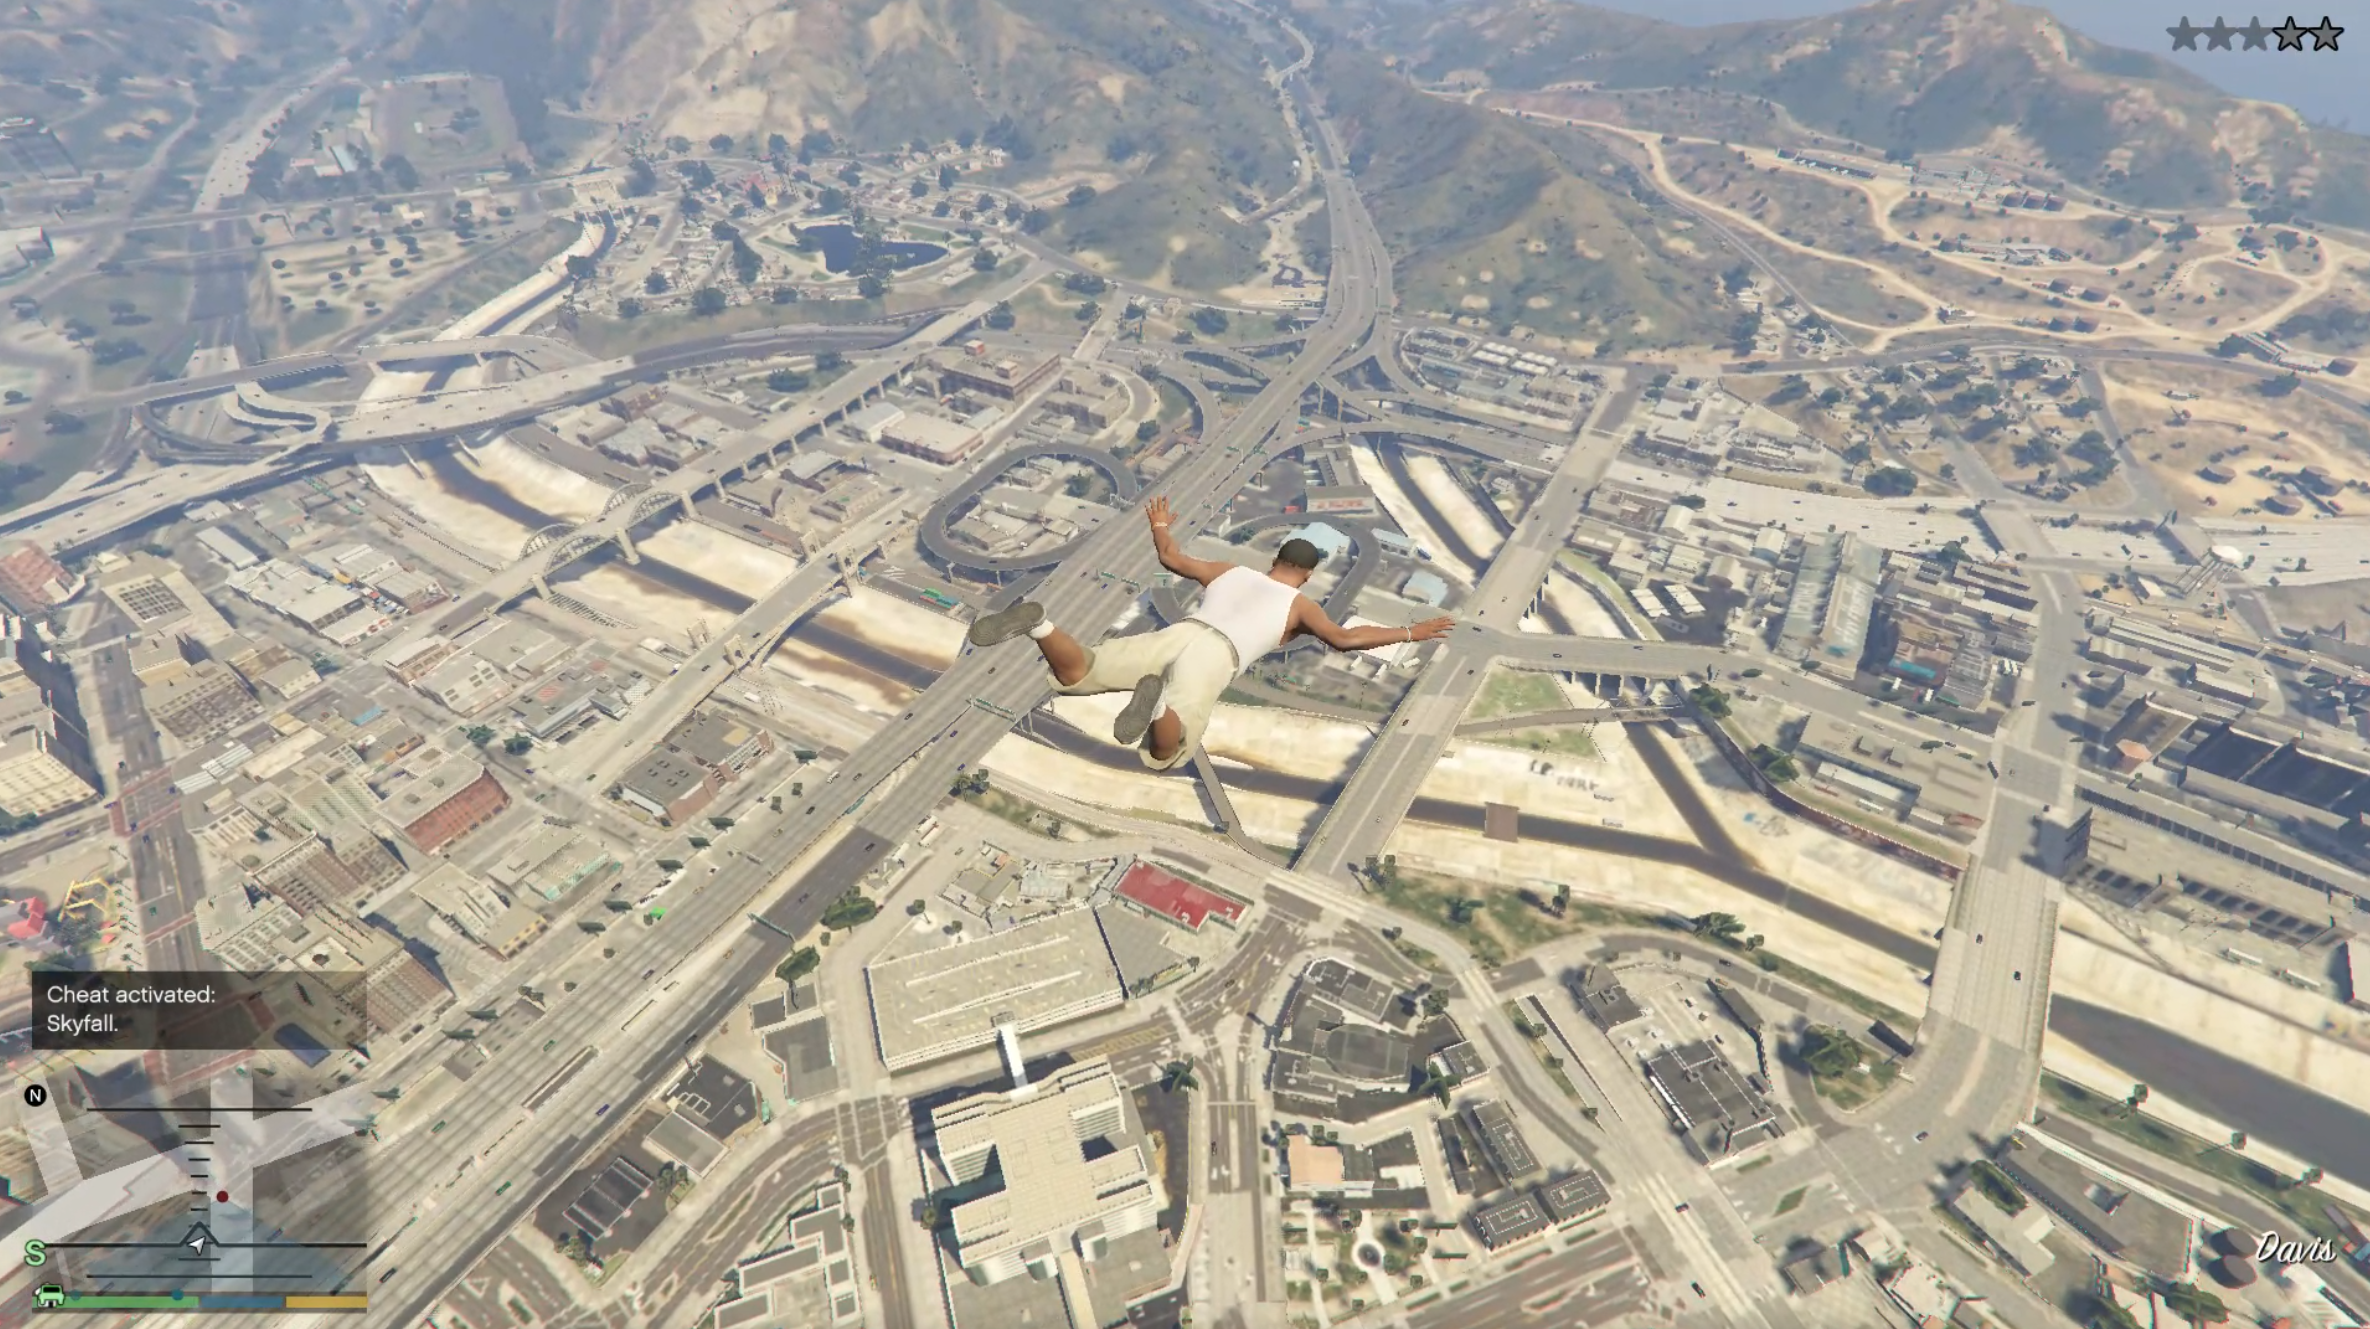 A screenshot from Grand Theft Auto 5, showing the character Franklin falling from the sky.